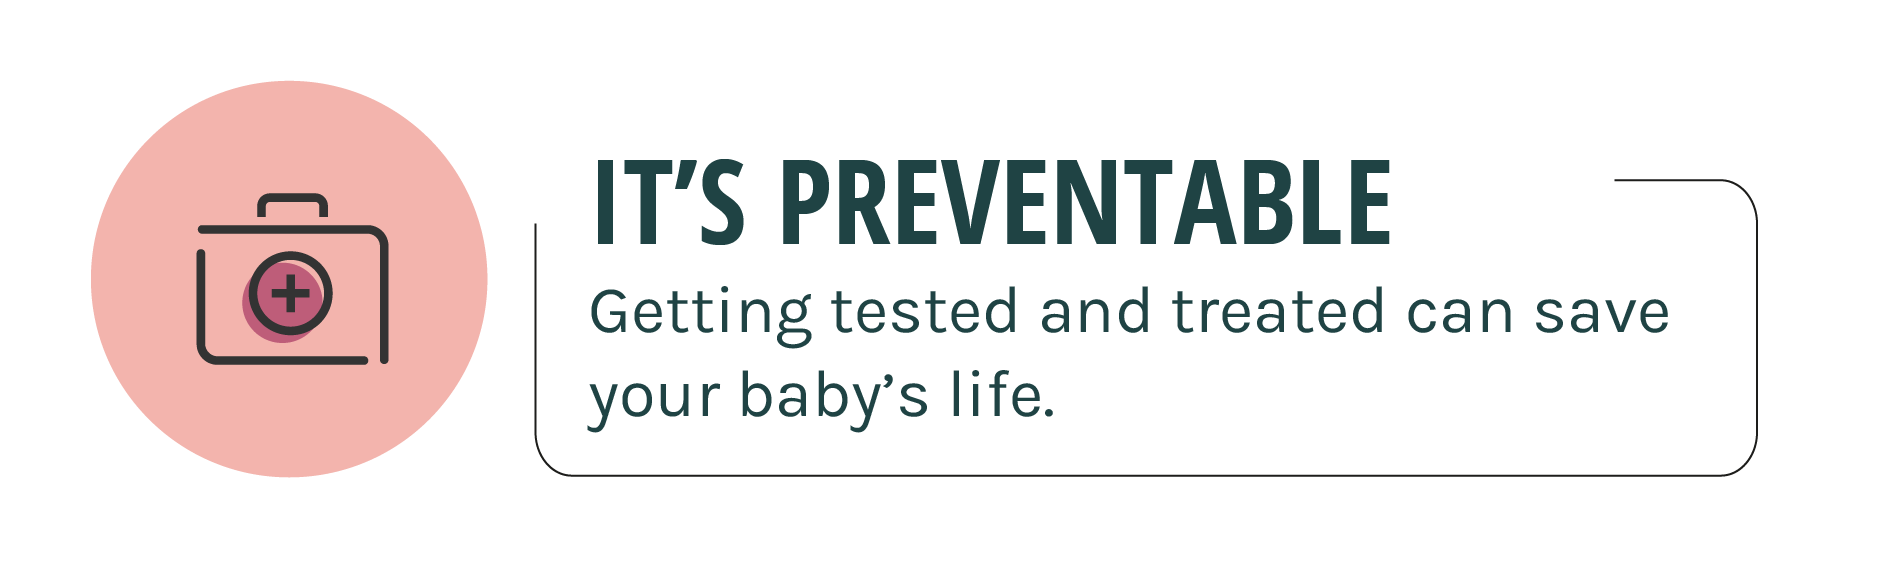 CS is preventable: getting tested and treated can save your baby's life